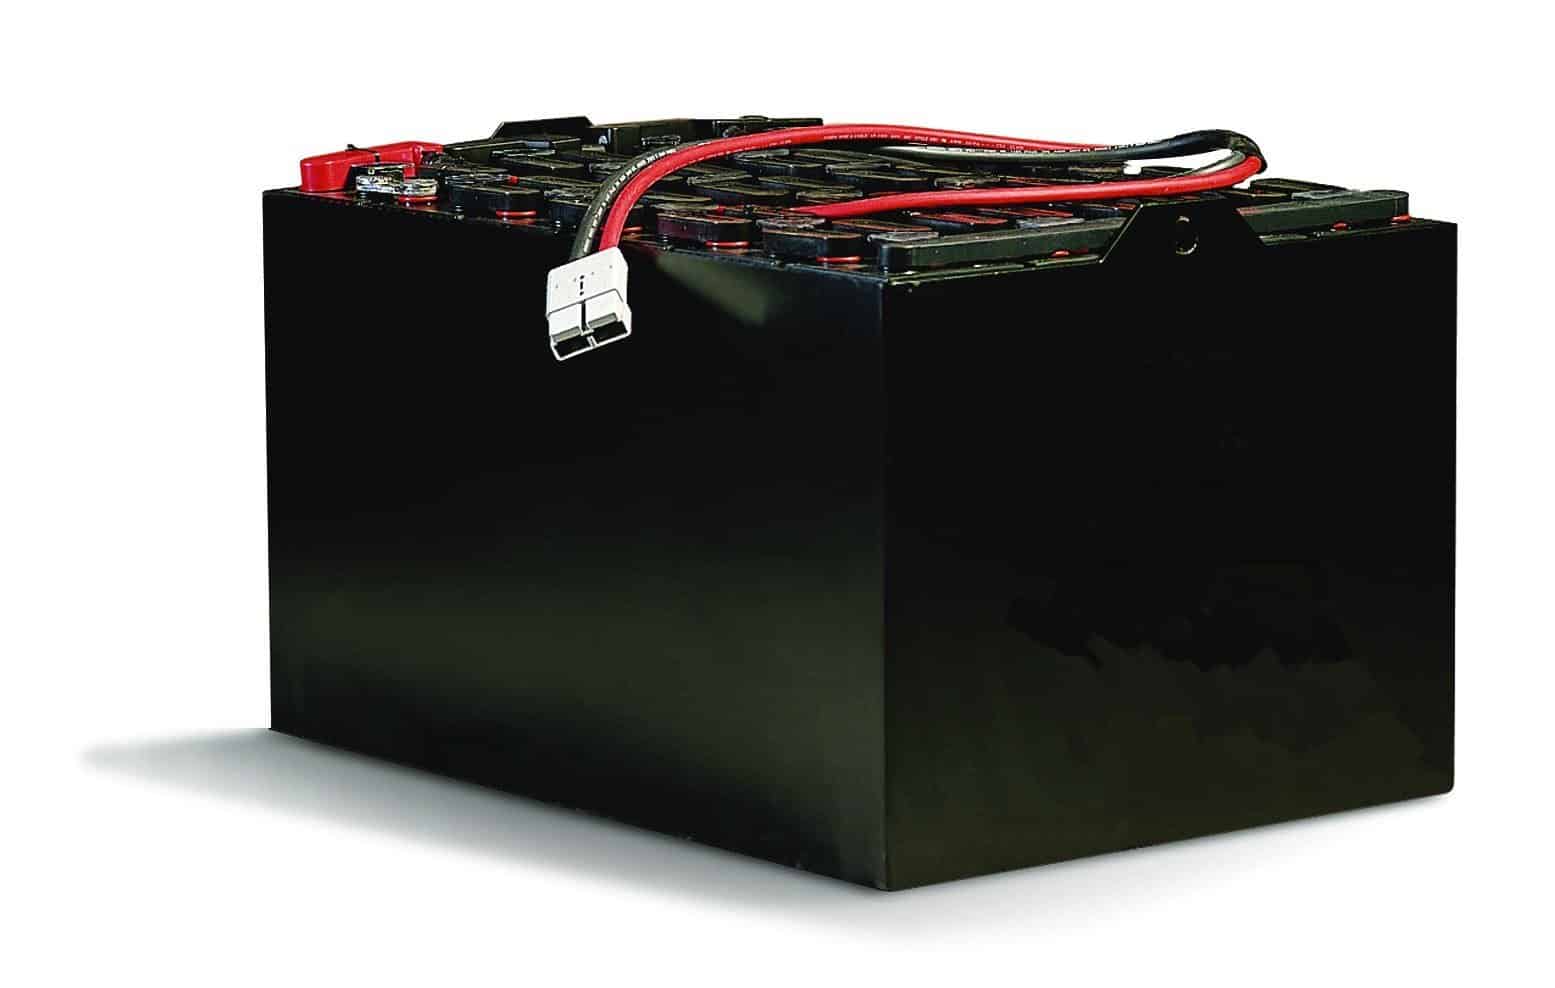 10 Charging Tips For Lift Truck Batteries